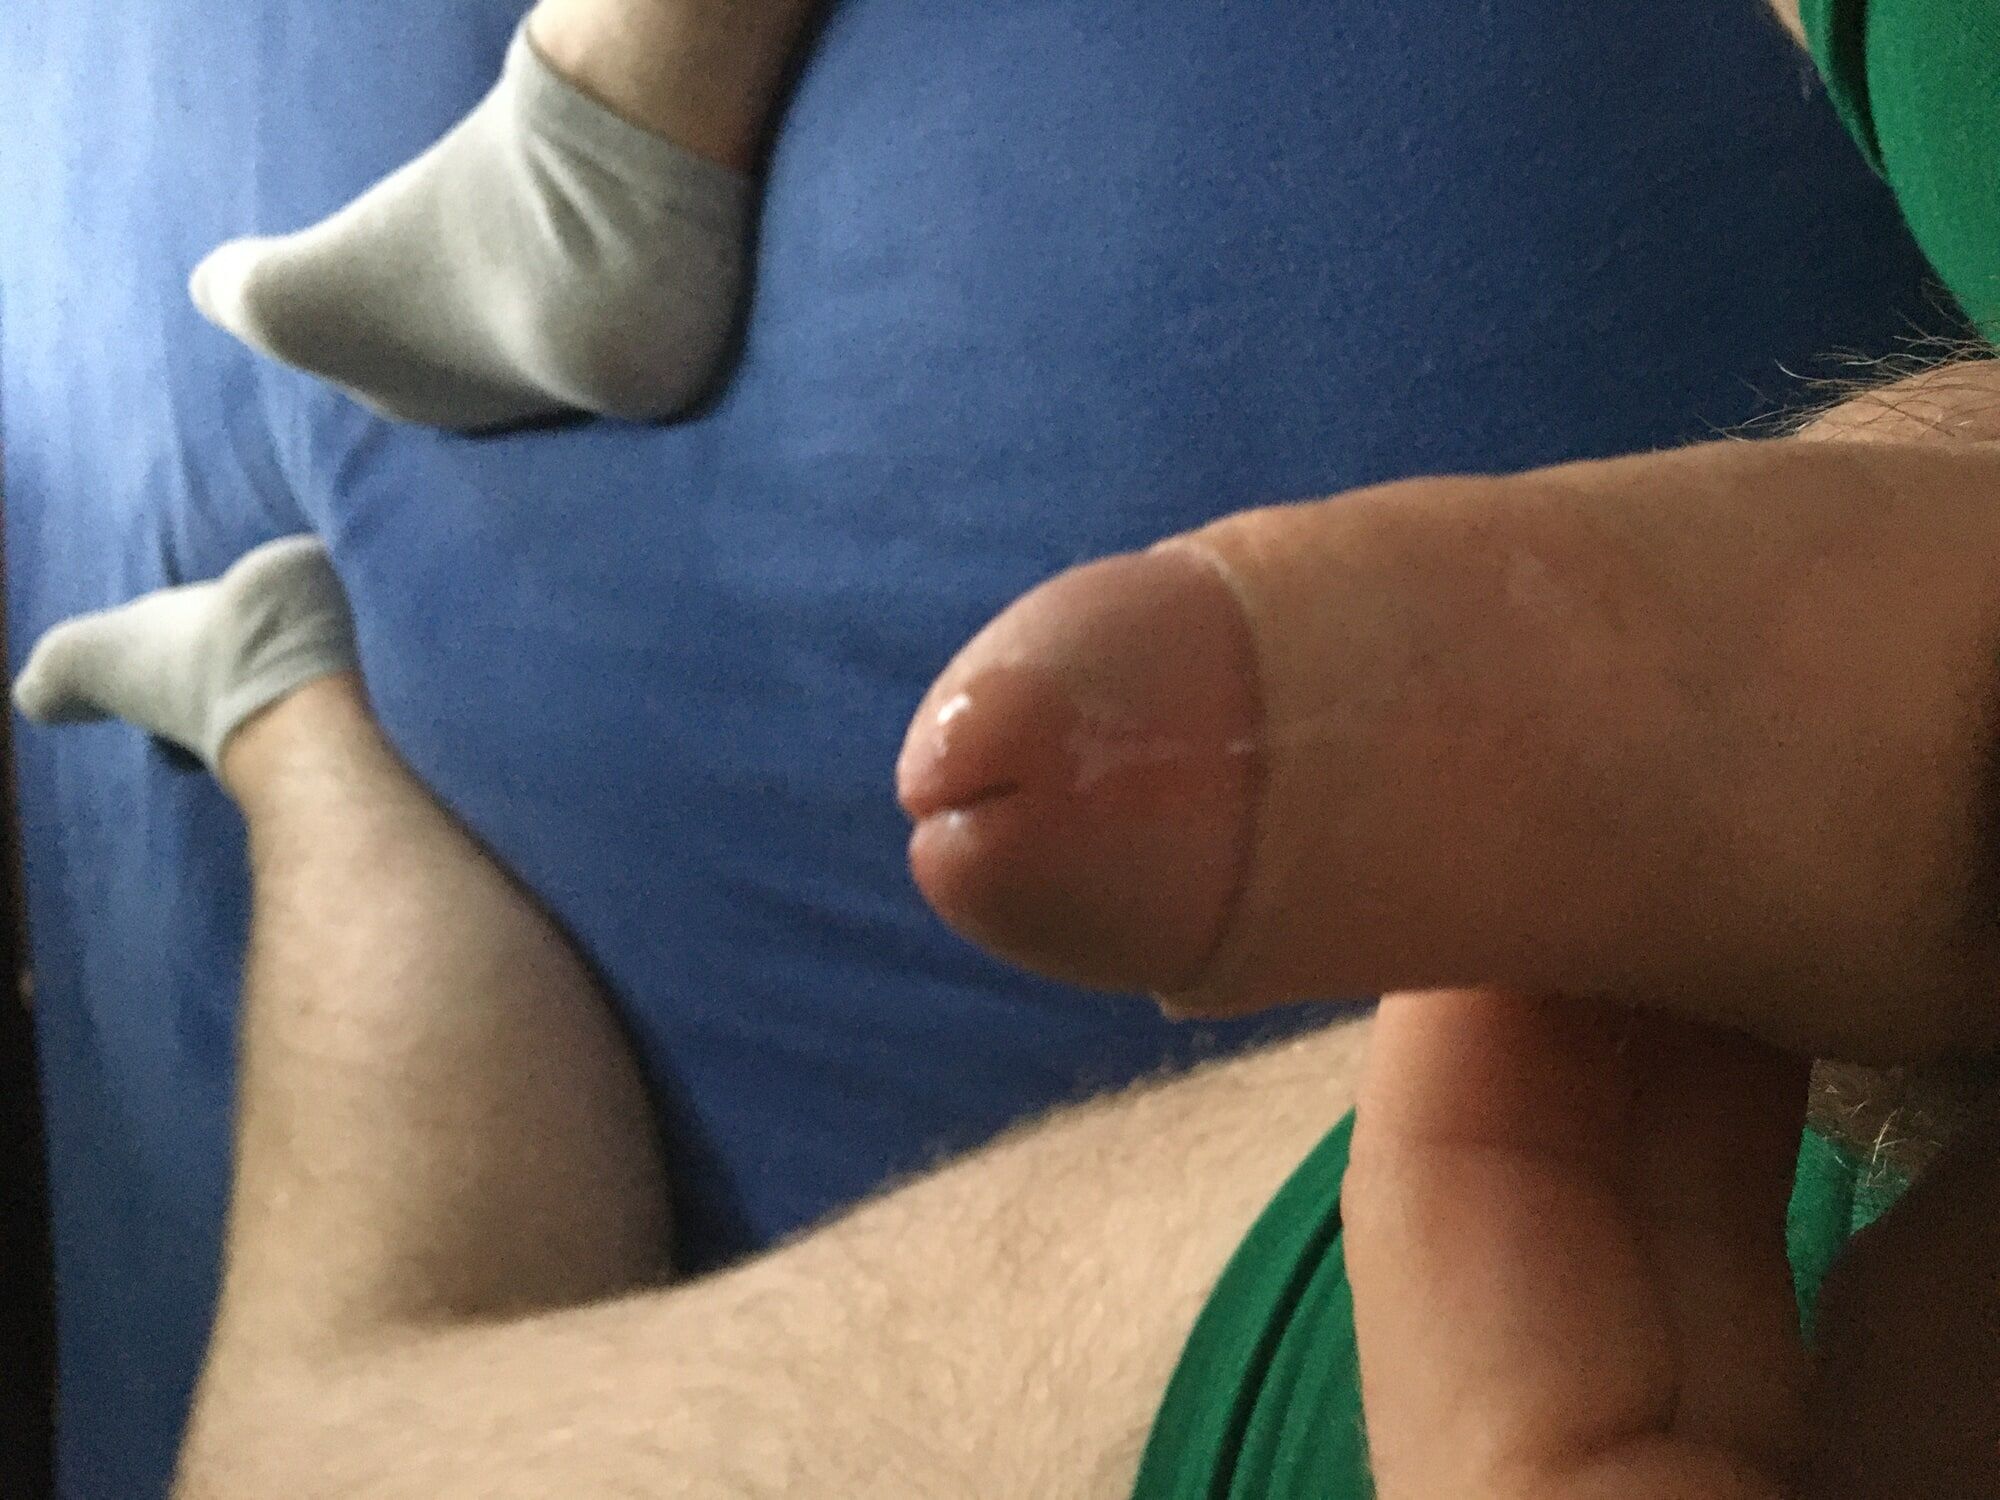 Hairy Dick And Balls Cockhead Foreskin Play With Pre- Cum #57